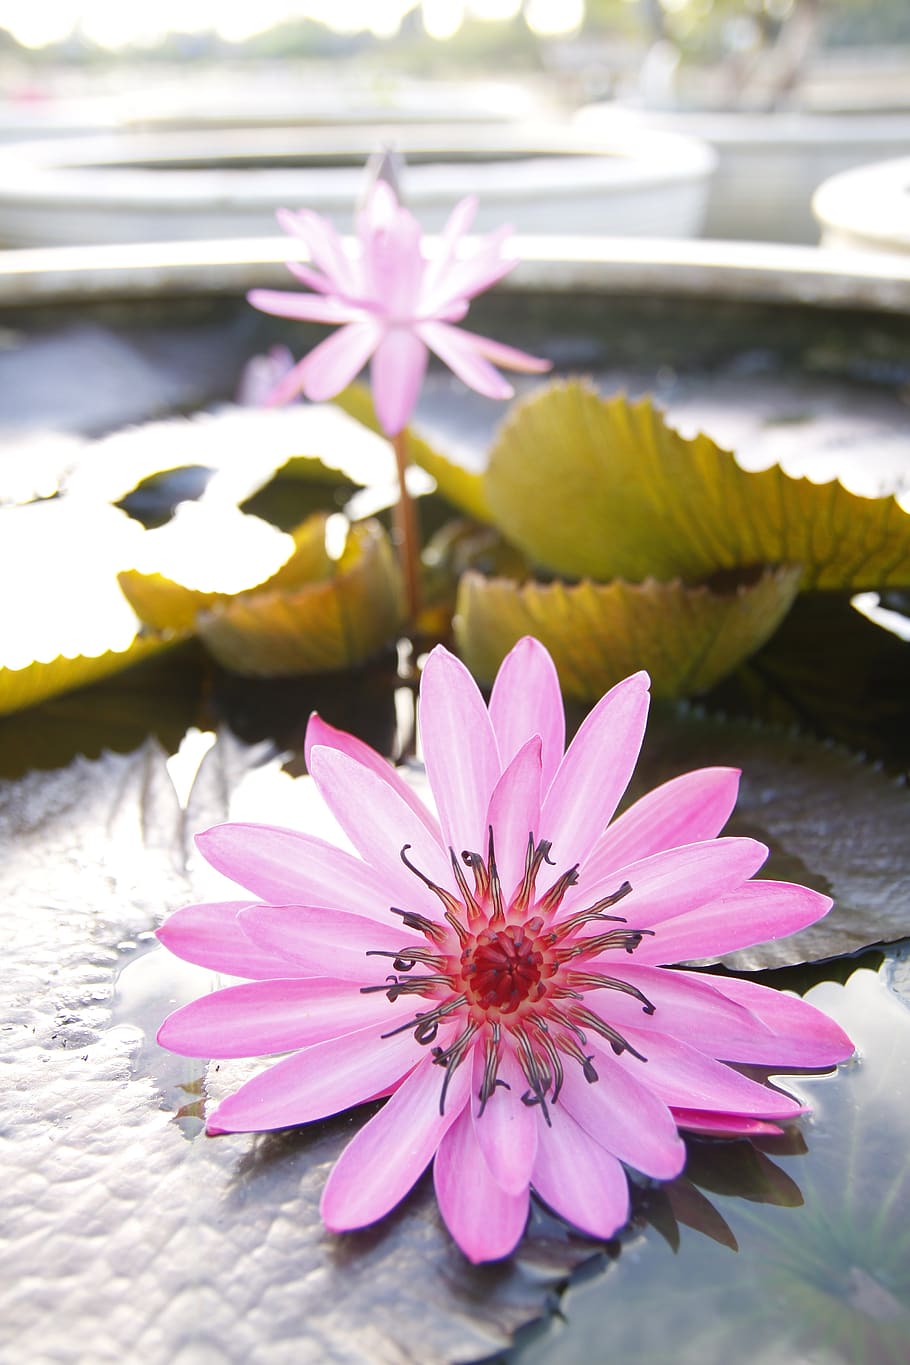 water lily, sung, pond, pink, nature, flowers, thailand, flower, flowering plant, plant